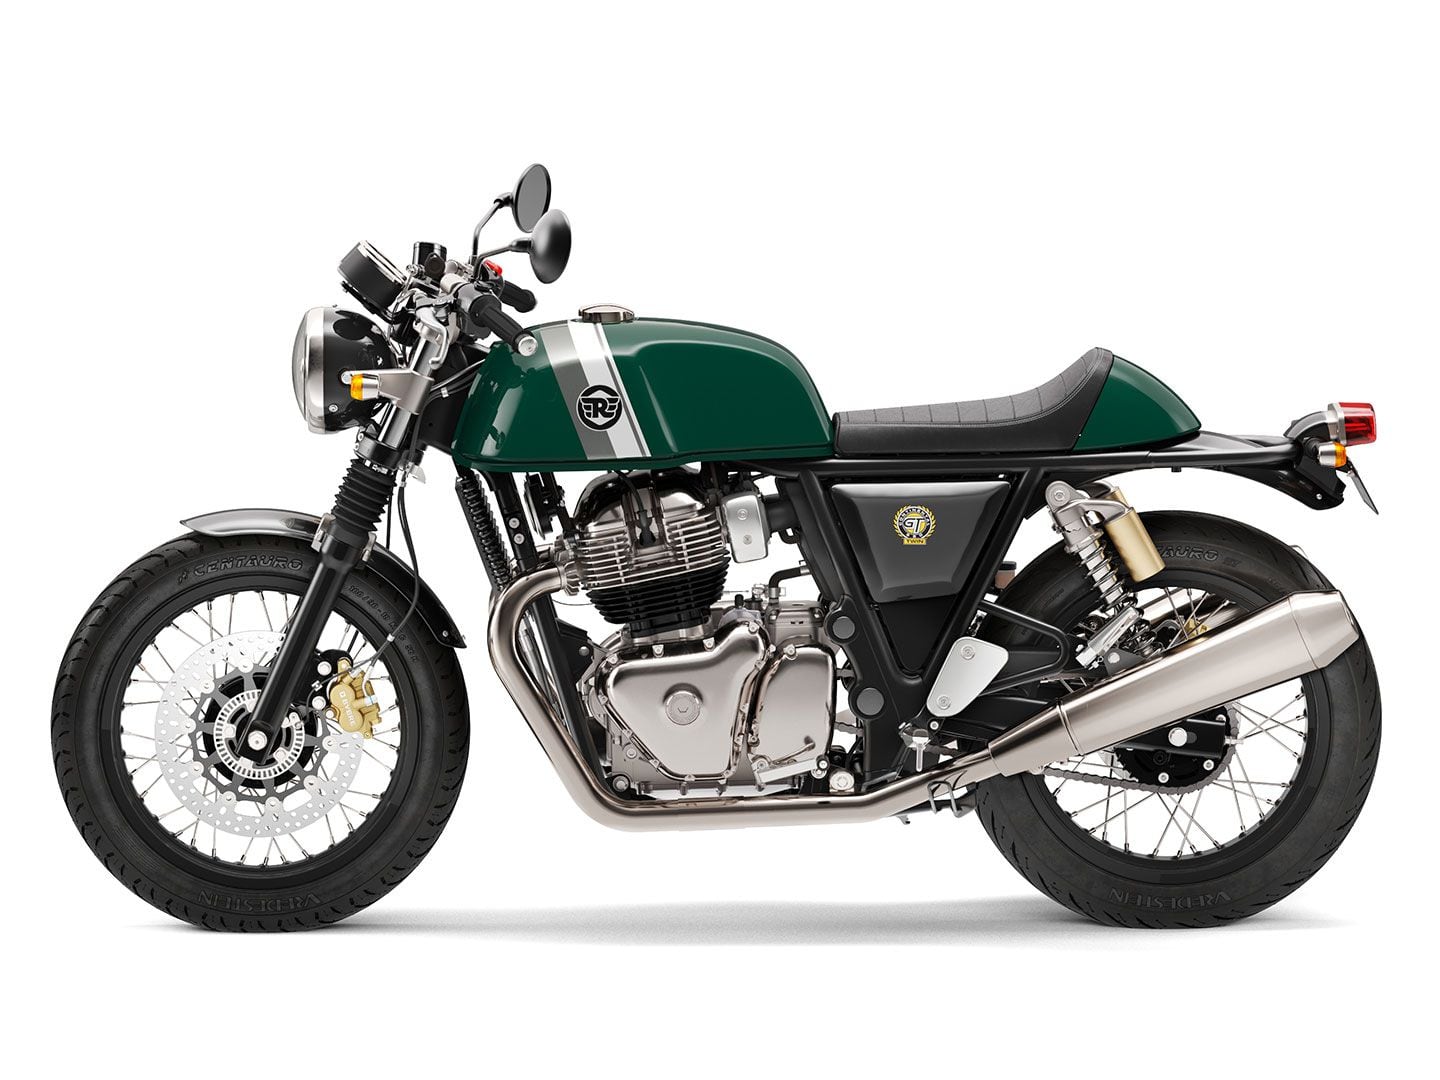 2024 Royal Enfield Continental GT 650 models with spoked wheels and chrome finishes, like the British Racing Green model shown here, have a starting MSRP of $6,349.